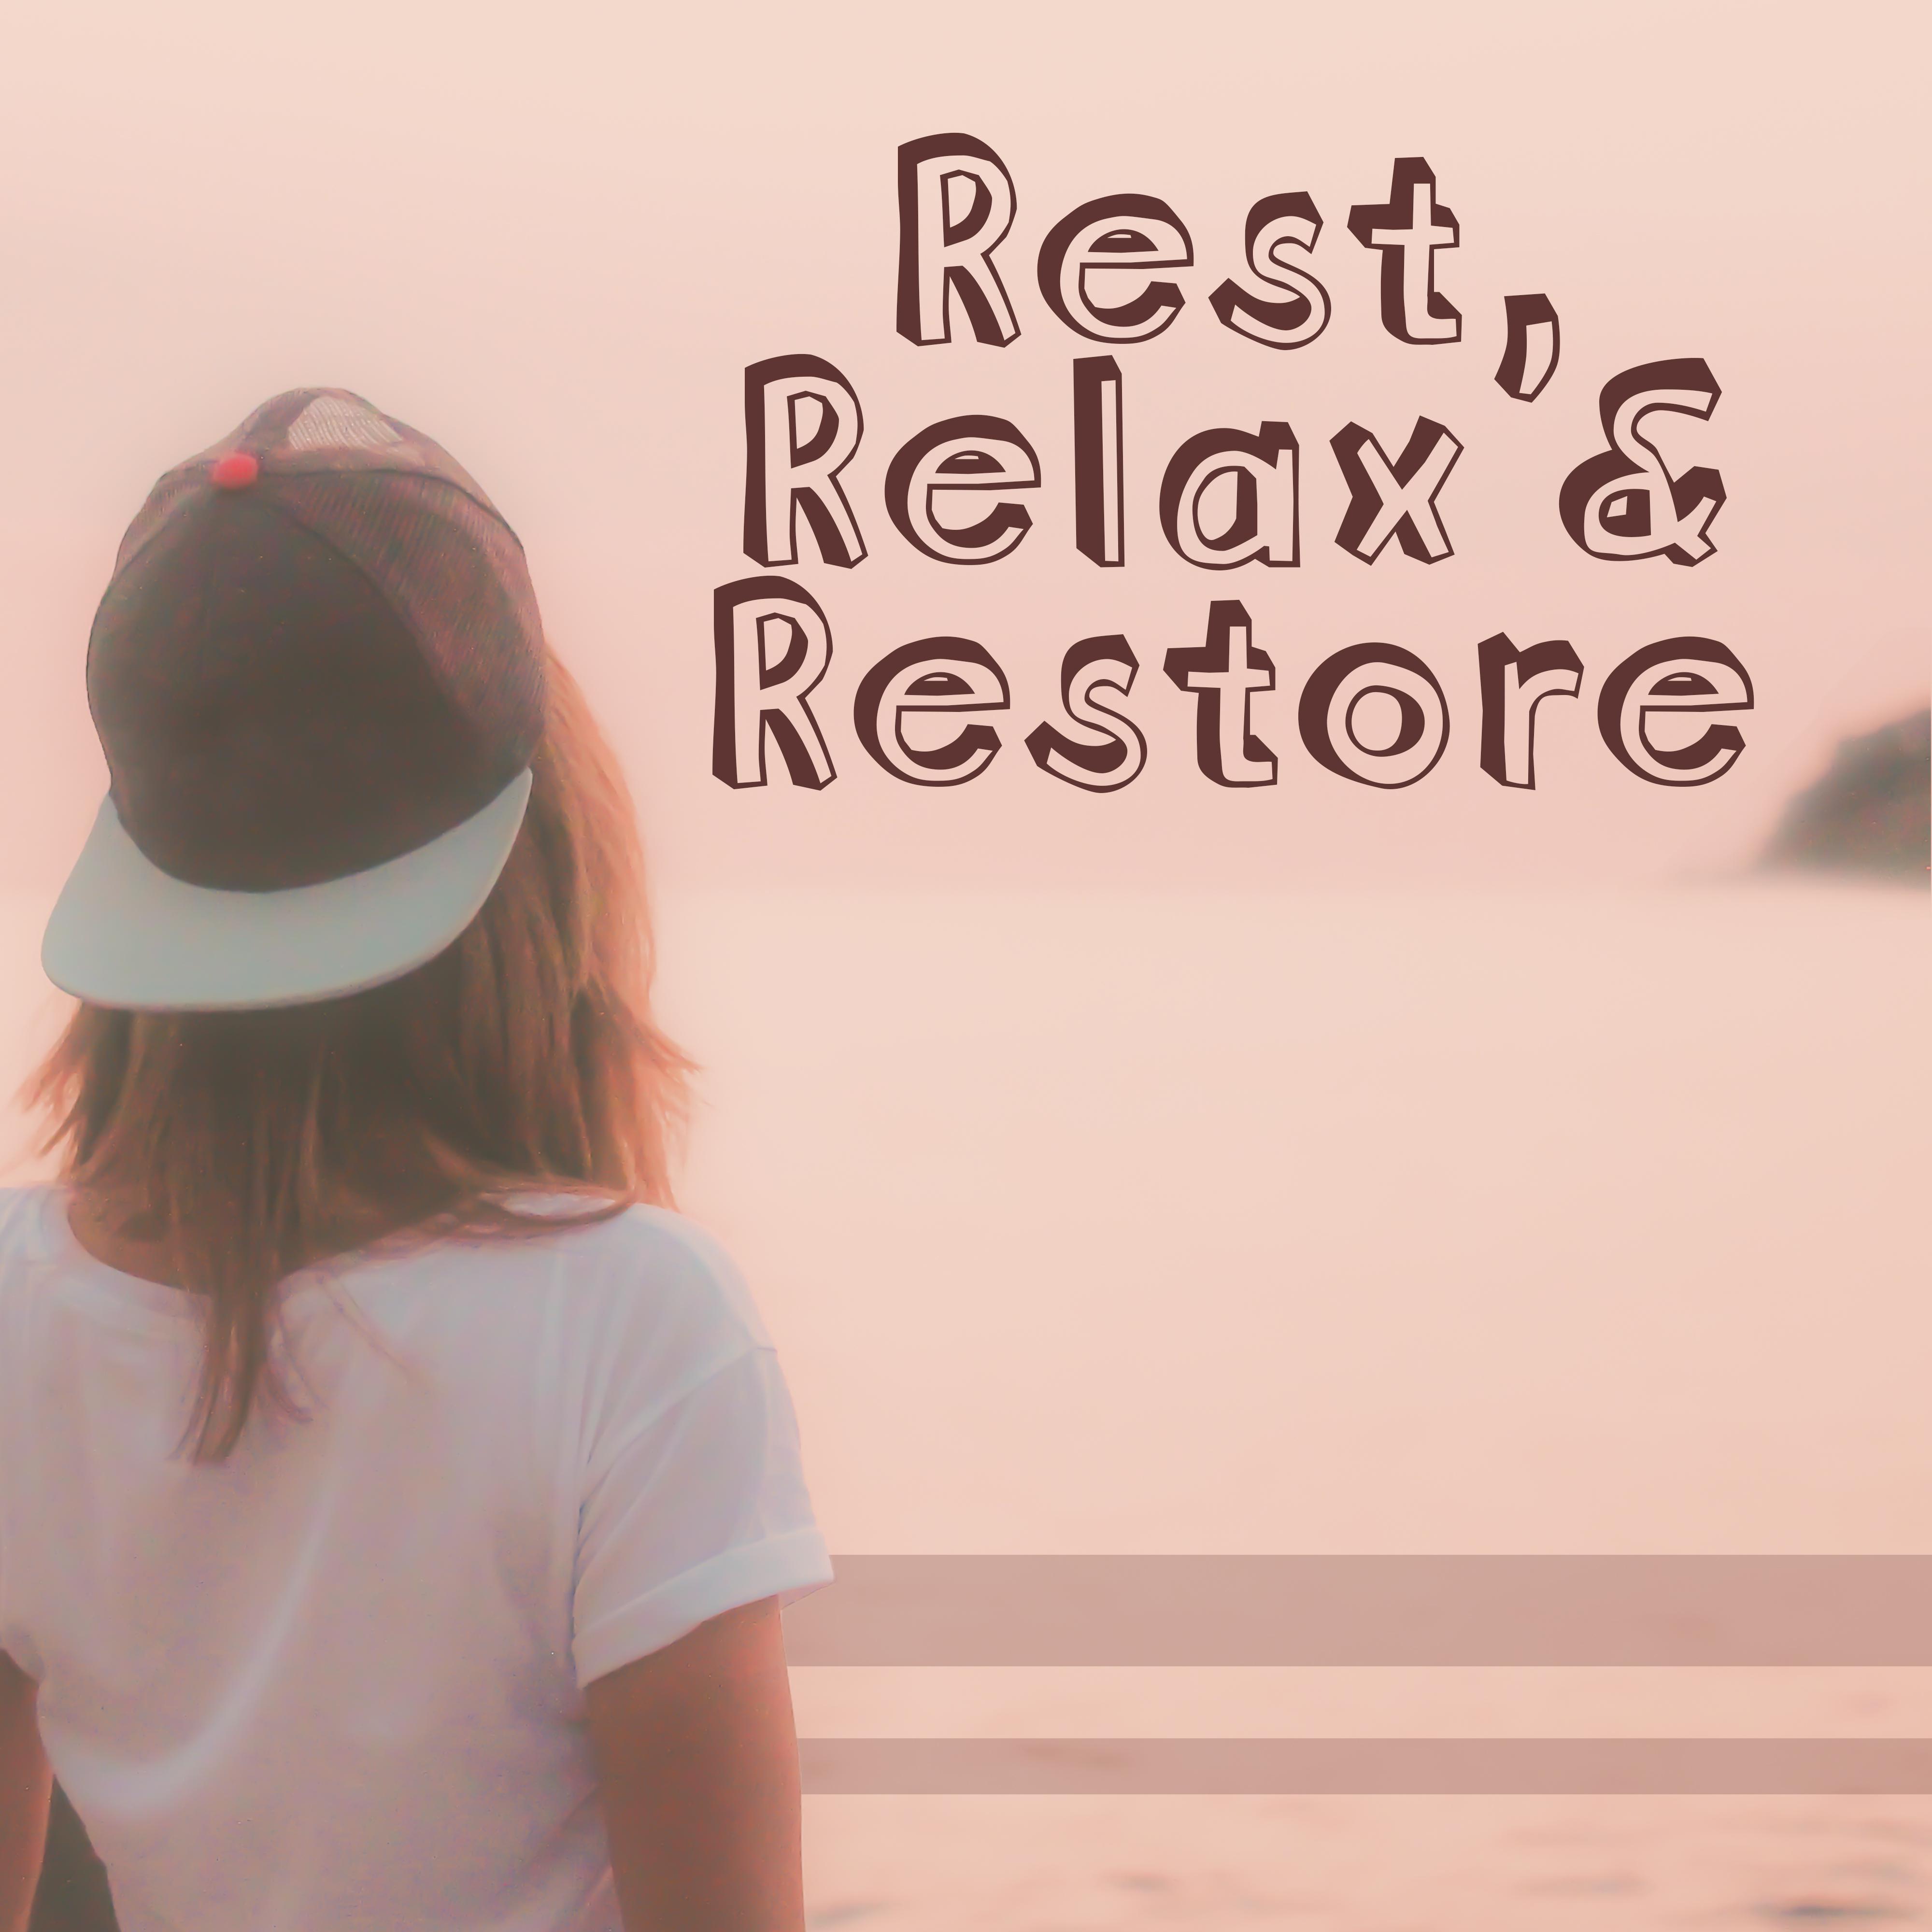 Rest, Relax & Restore – New Age, Relaxing Music, Calming Sounds of Nature, Rest, Manage Stress